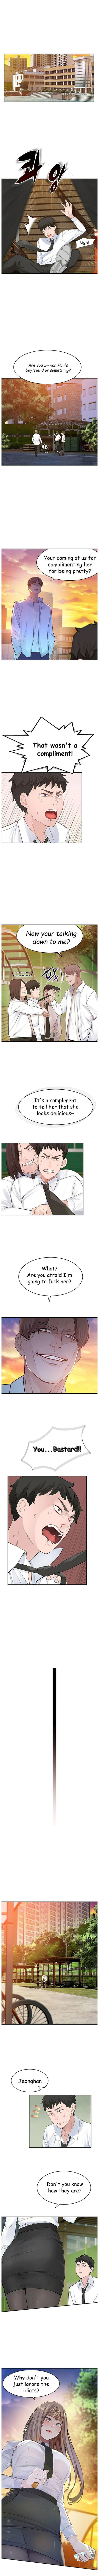 Sucks BETWEEN US Ch. 1-32 Hung - Page 2